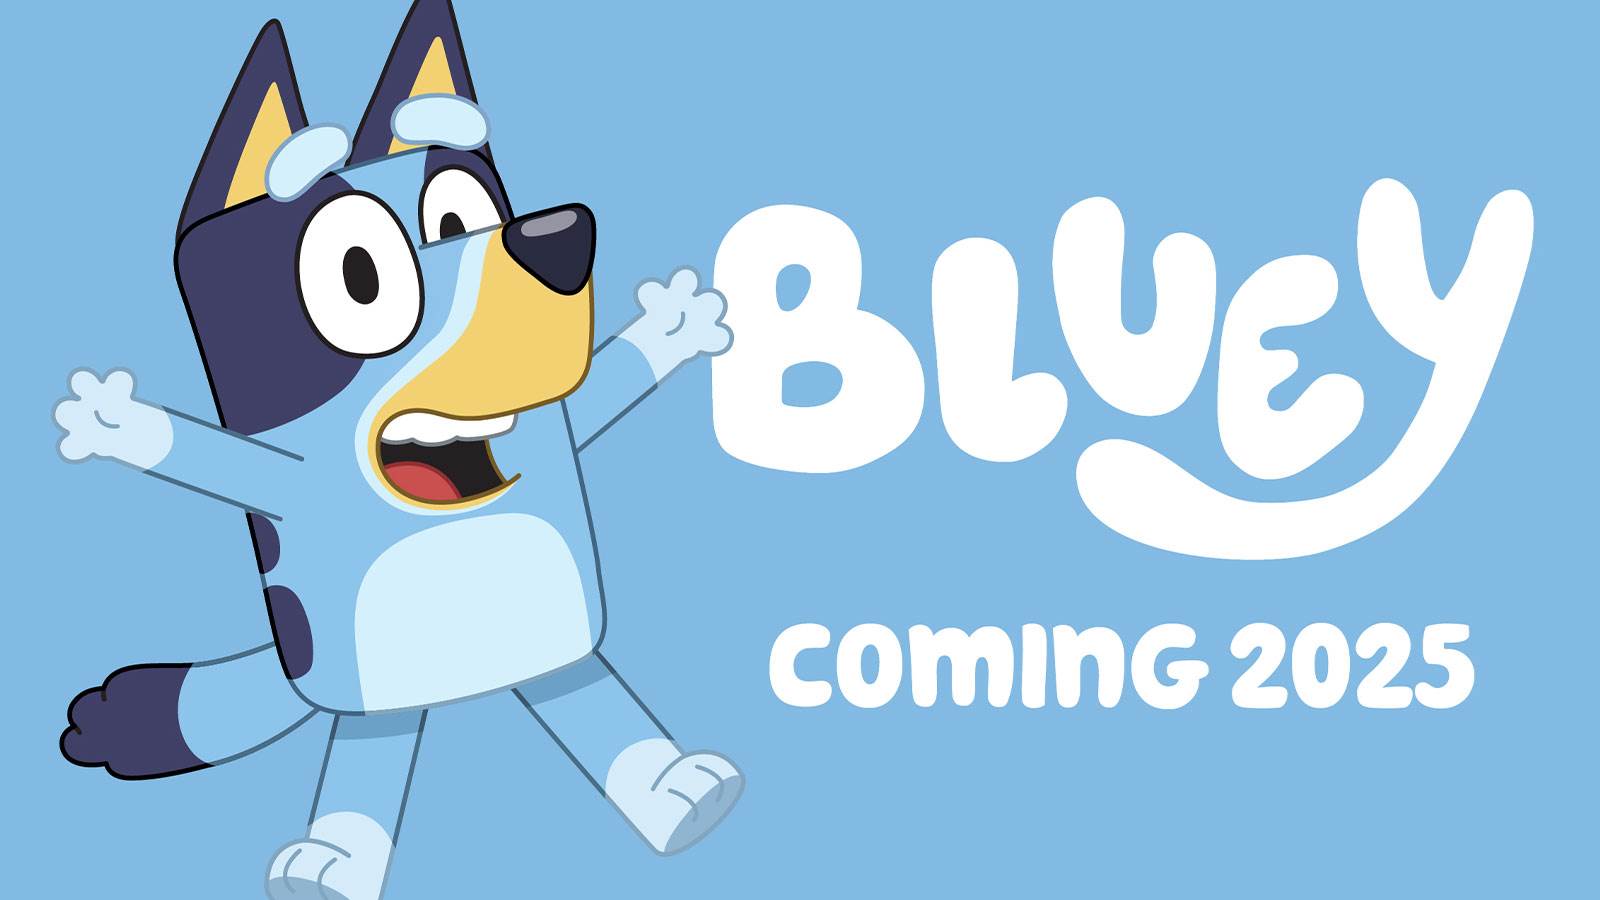 Bluey is waving on a blue background. To their left reads: Bluey Coming 2025